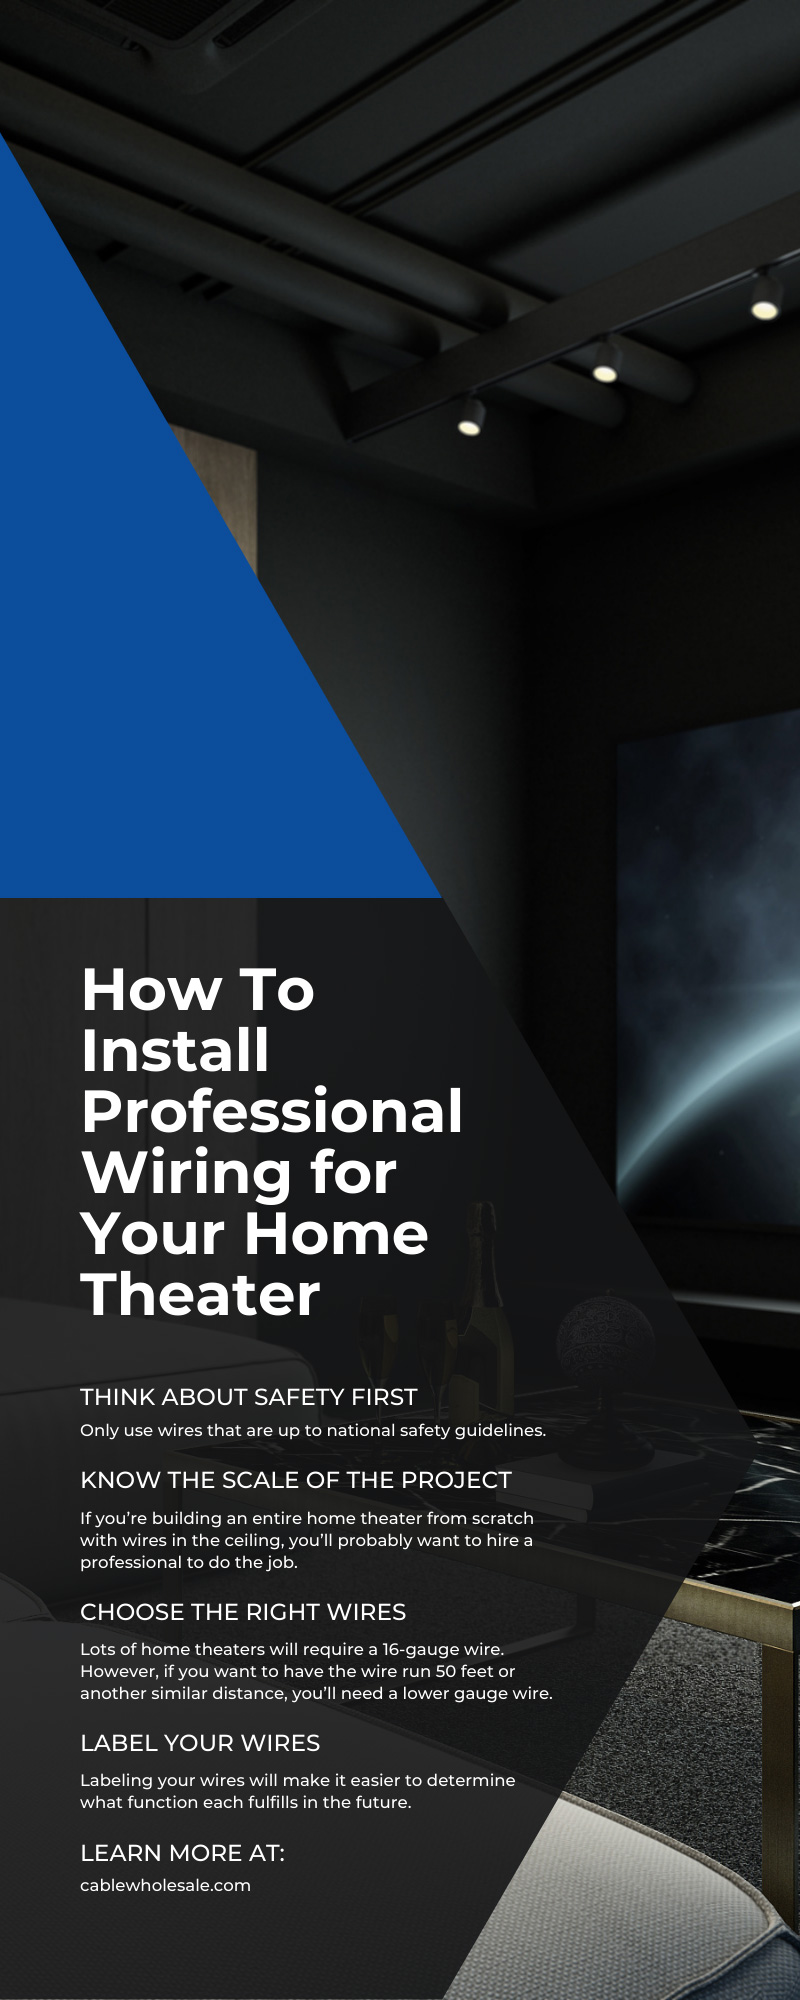 How To Install Professional Wiring for Your Home Theater